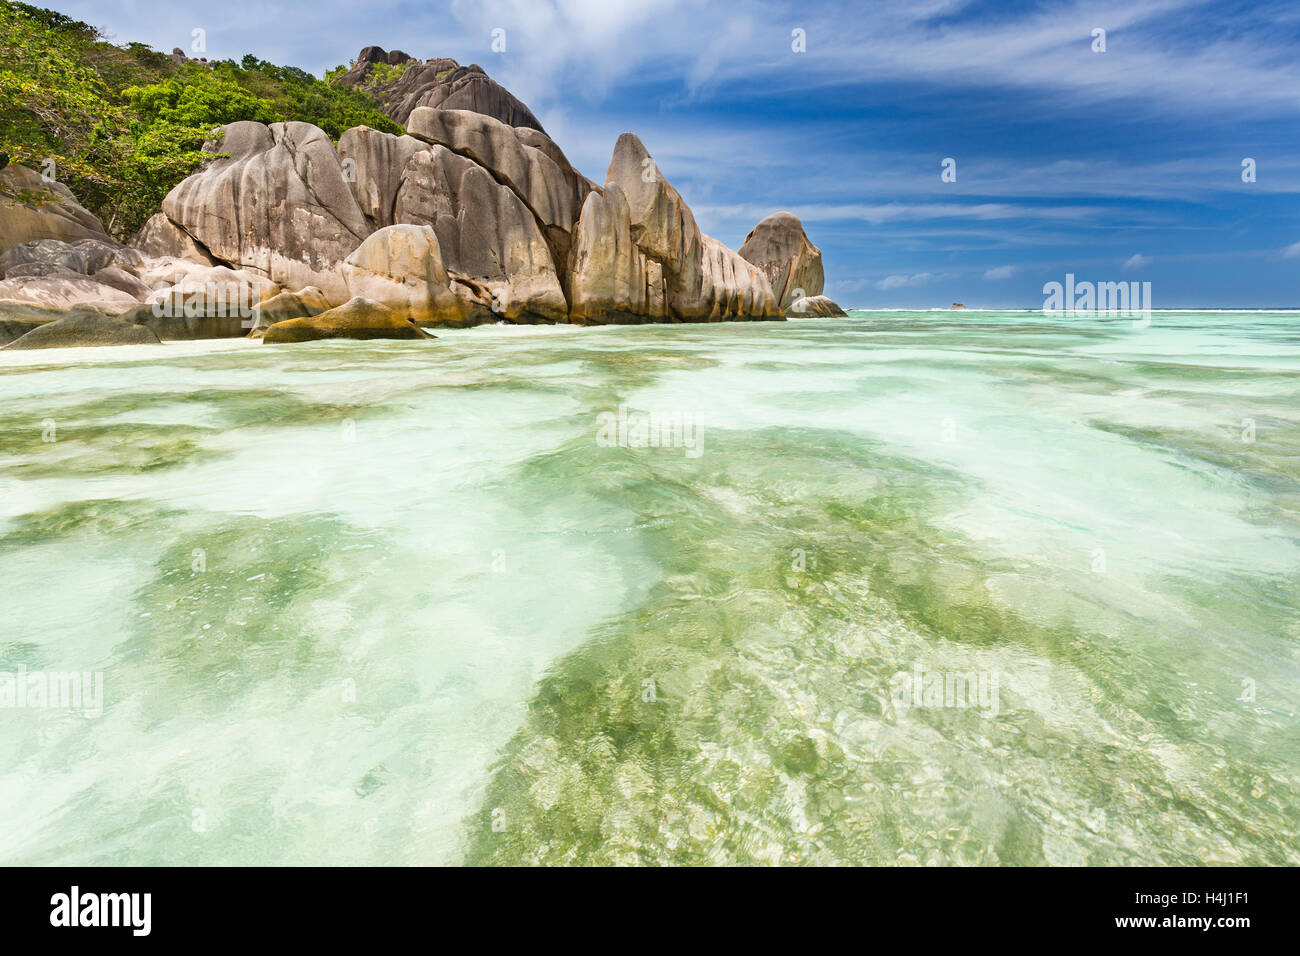 Turquoise water and coral reefs in front of the La Digue coastline, Seychelles with granite rocks Stock Photo